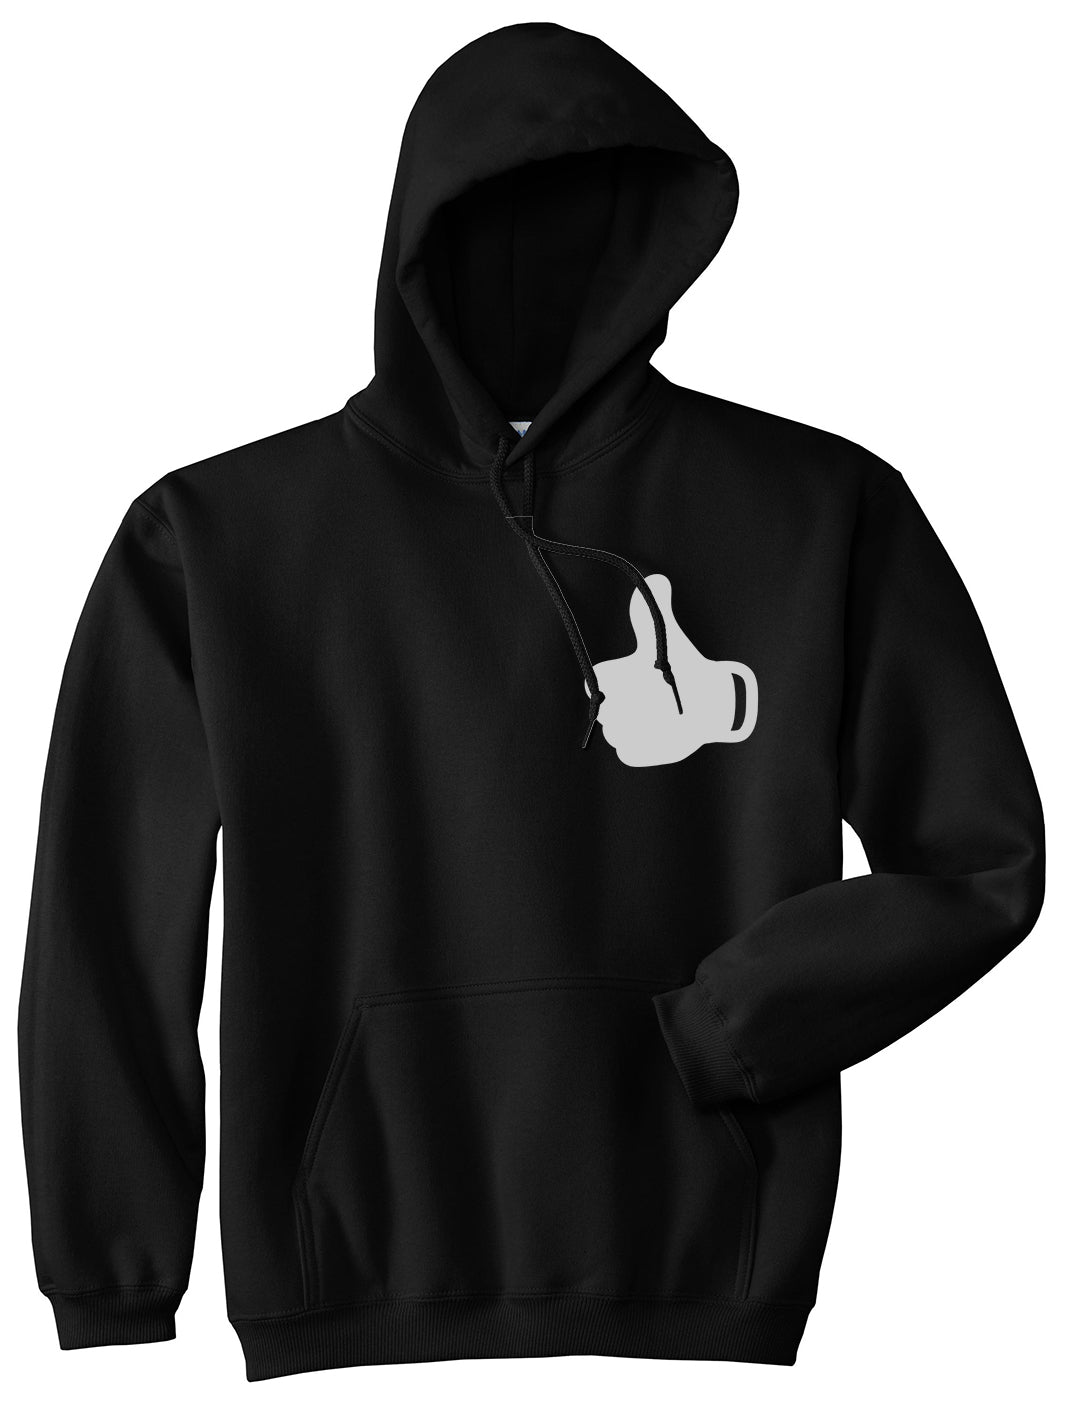 Thumbs Up Emoji Chest Black Pullover Hoodie by Kings Of NY